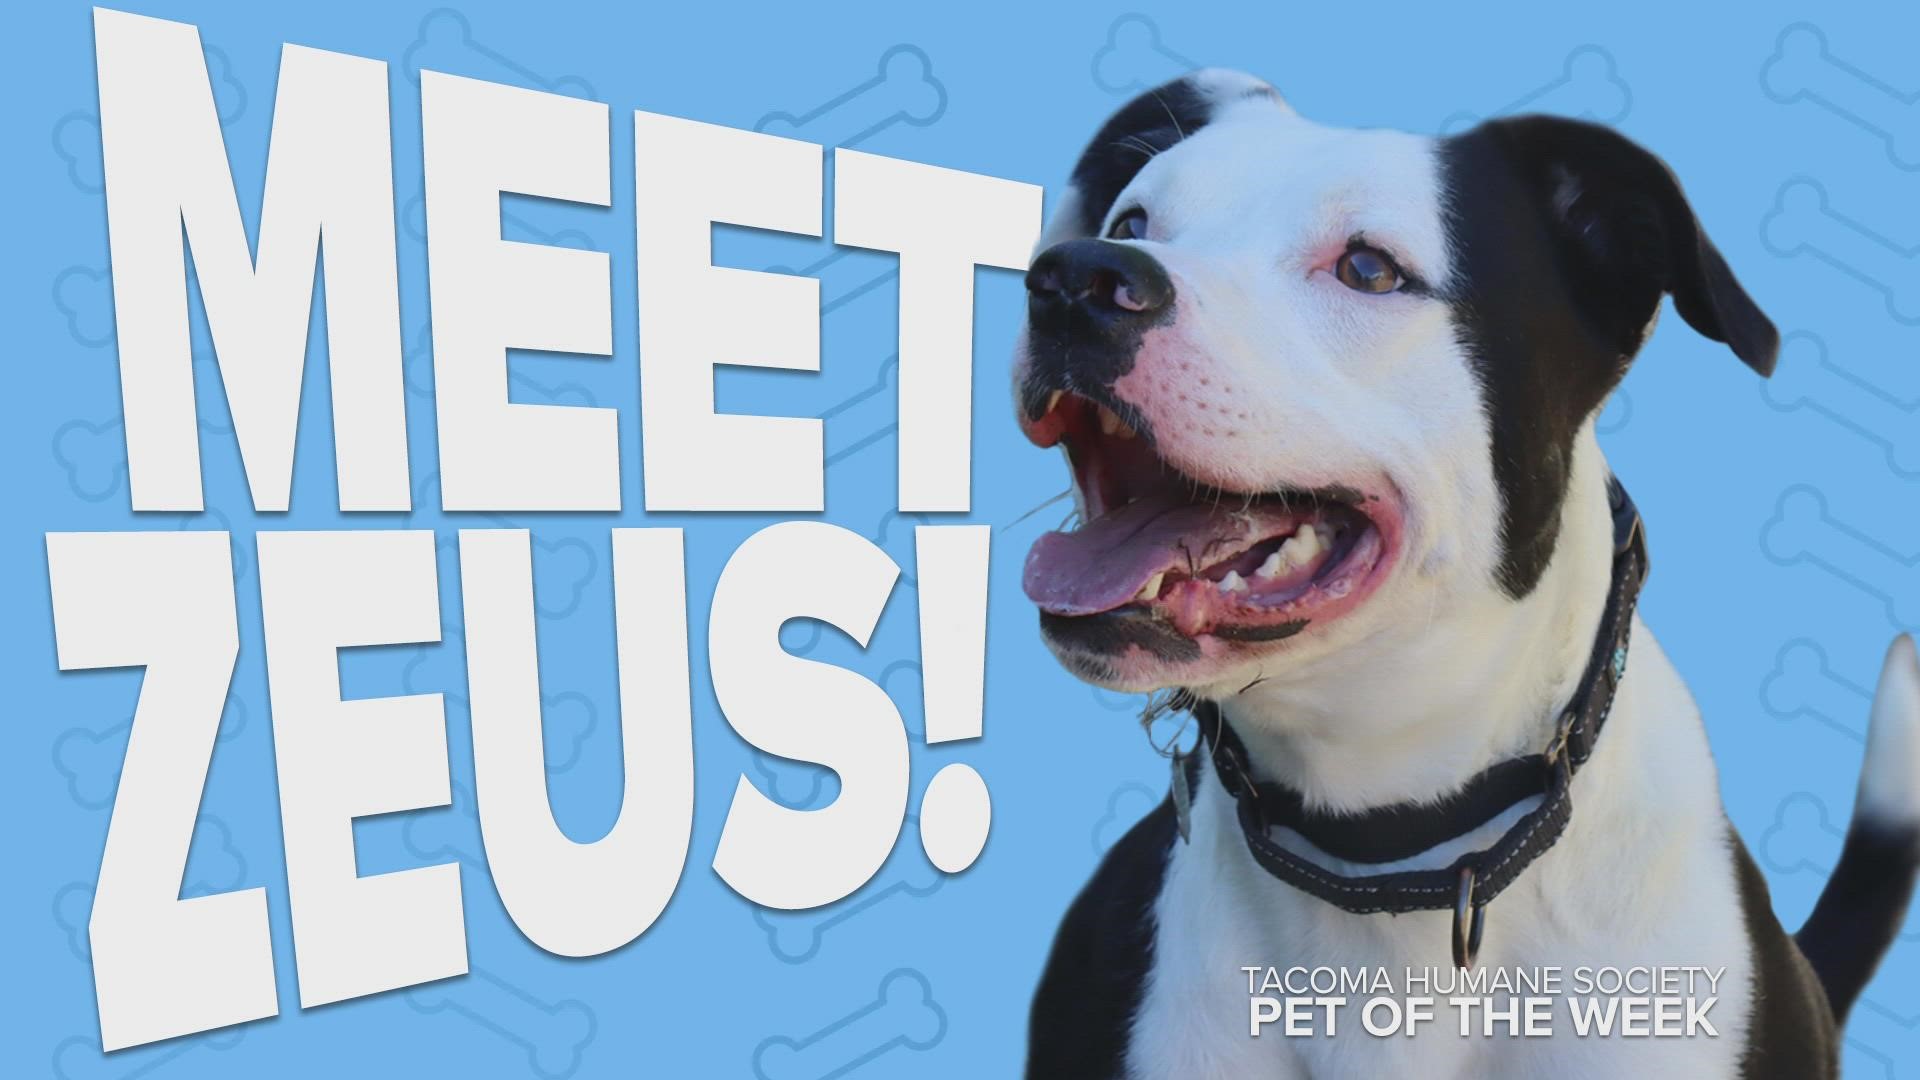 This week's featured rescue pet is Zeus!